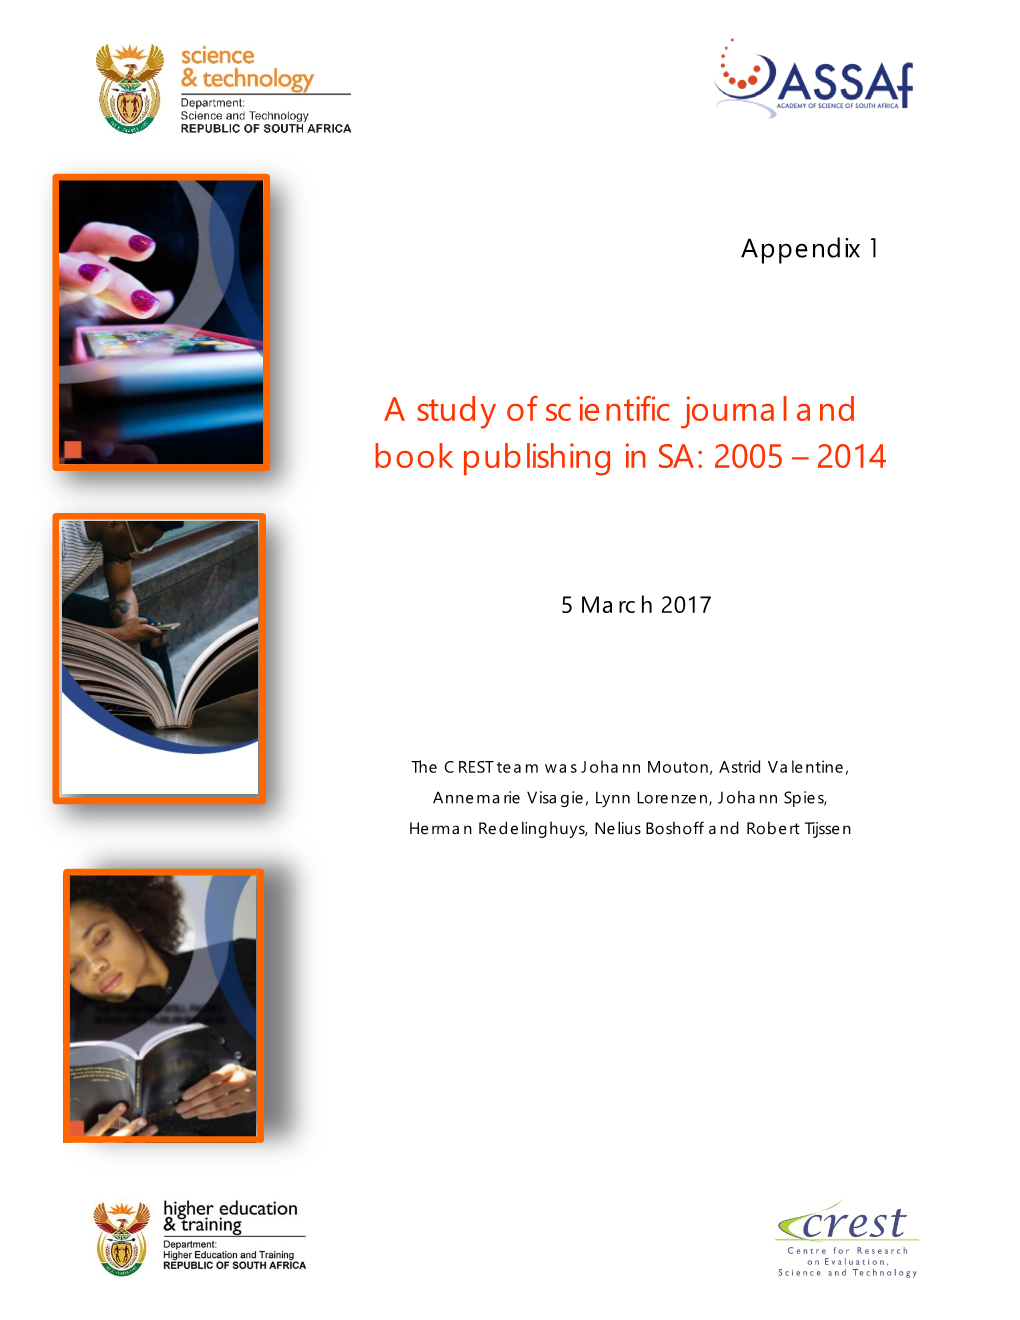 A Study of Scientific Journal and Book Publishing in SA: 2005 – 2014